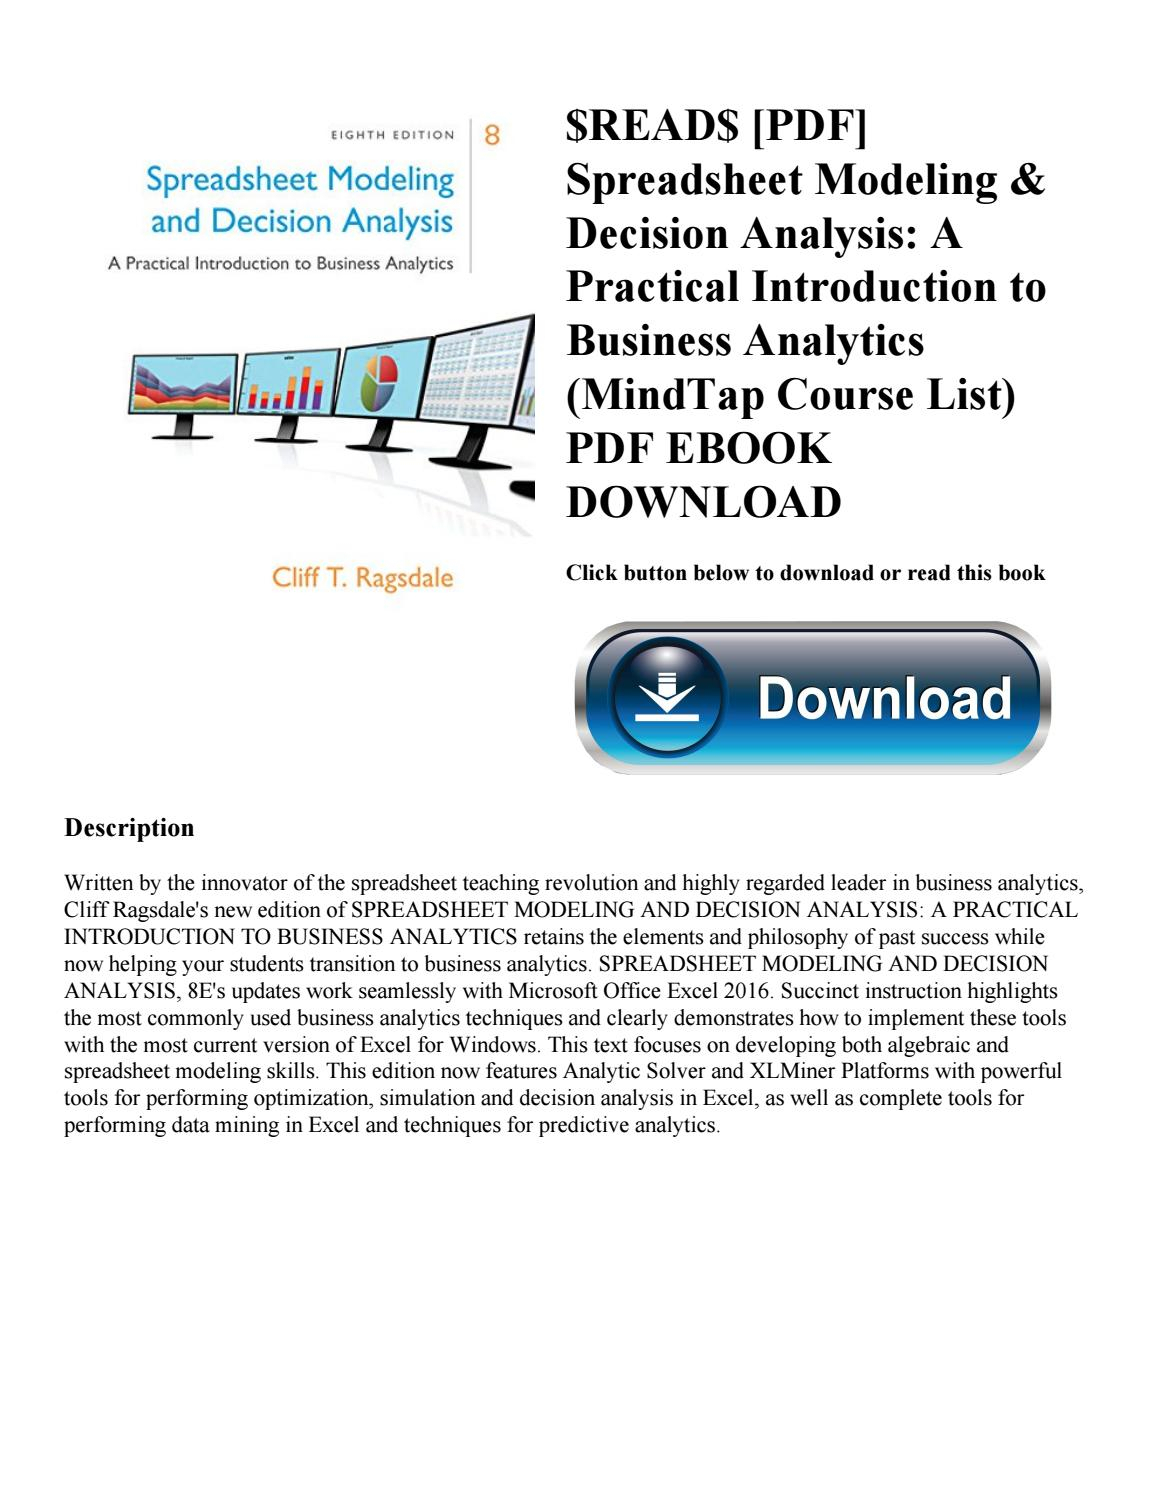 Spreadsheet Modeling Course For Read$ [Pdf] Spreadsheet Modeling  Decision Analysis A Practical